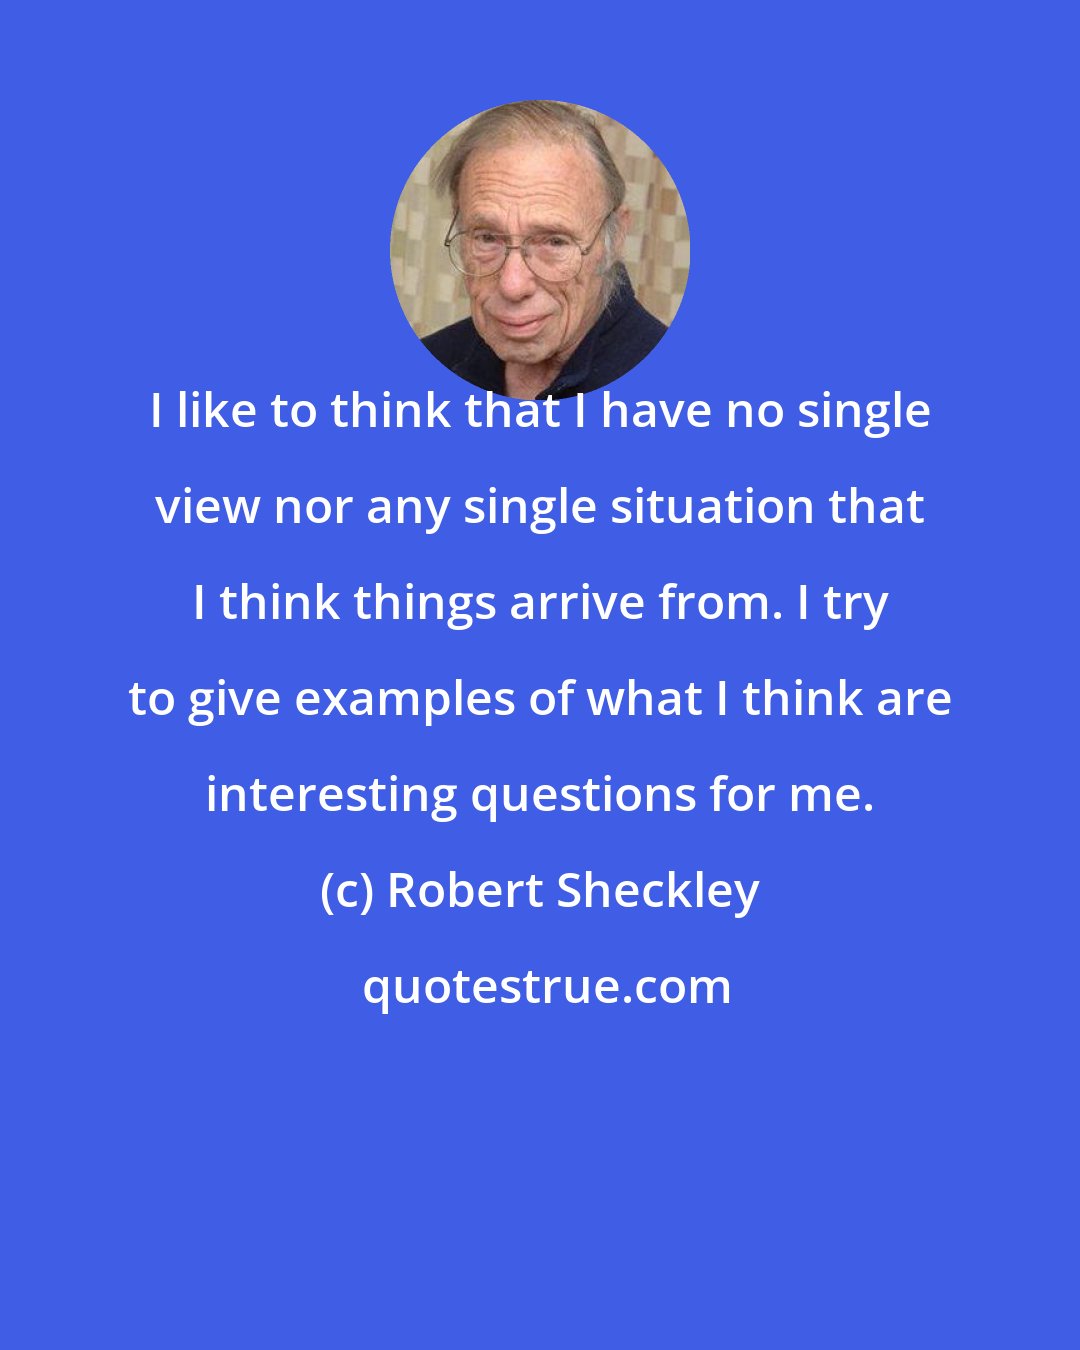 Robert Sheckley: I like to think that I have no single view nor any single situation that I think things arrive from. I try to give examples of what I think are interesting questions for me.